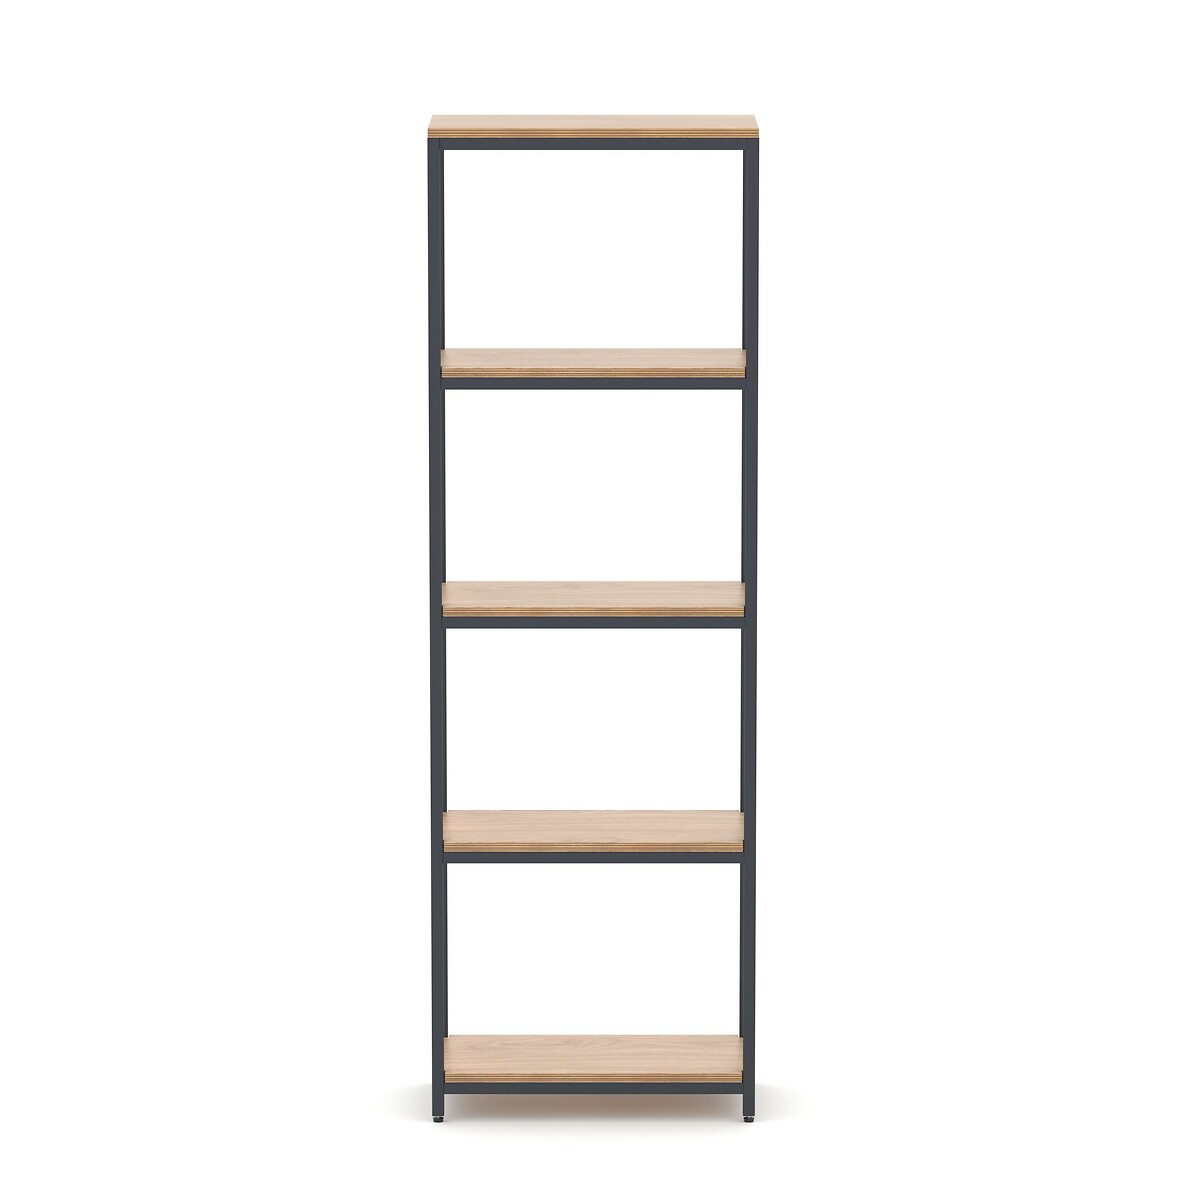 Talist 5 Shelf Shelving Unit In Wood, Diy Wall Shelves With 2 215 40